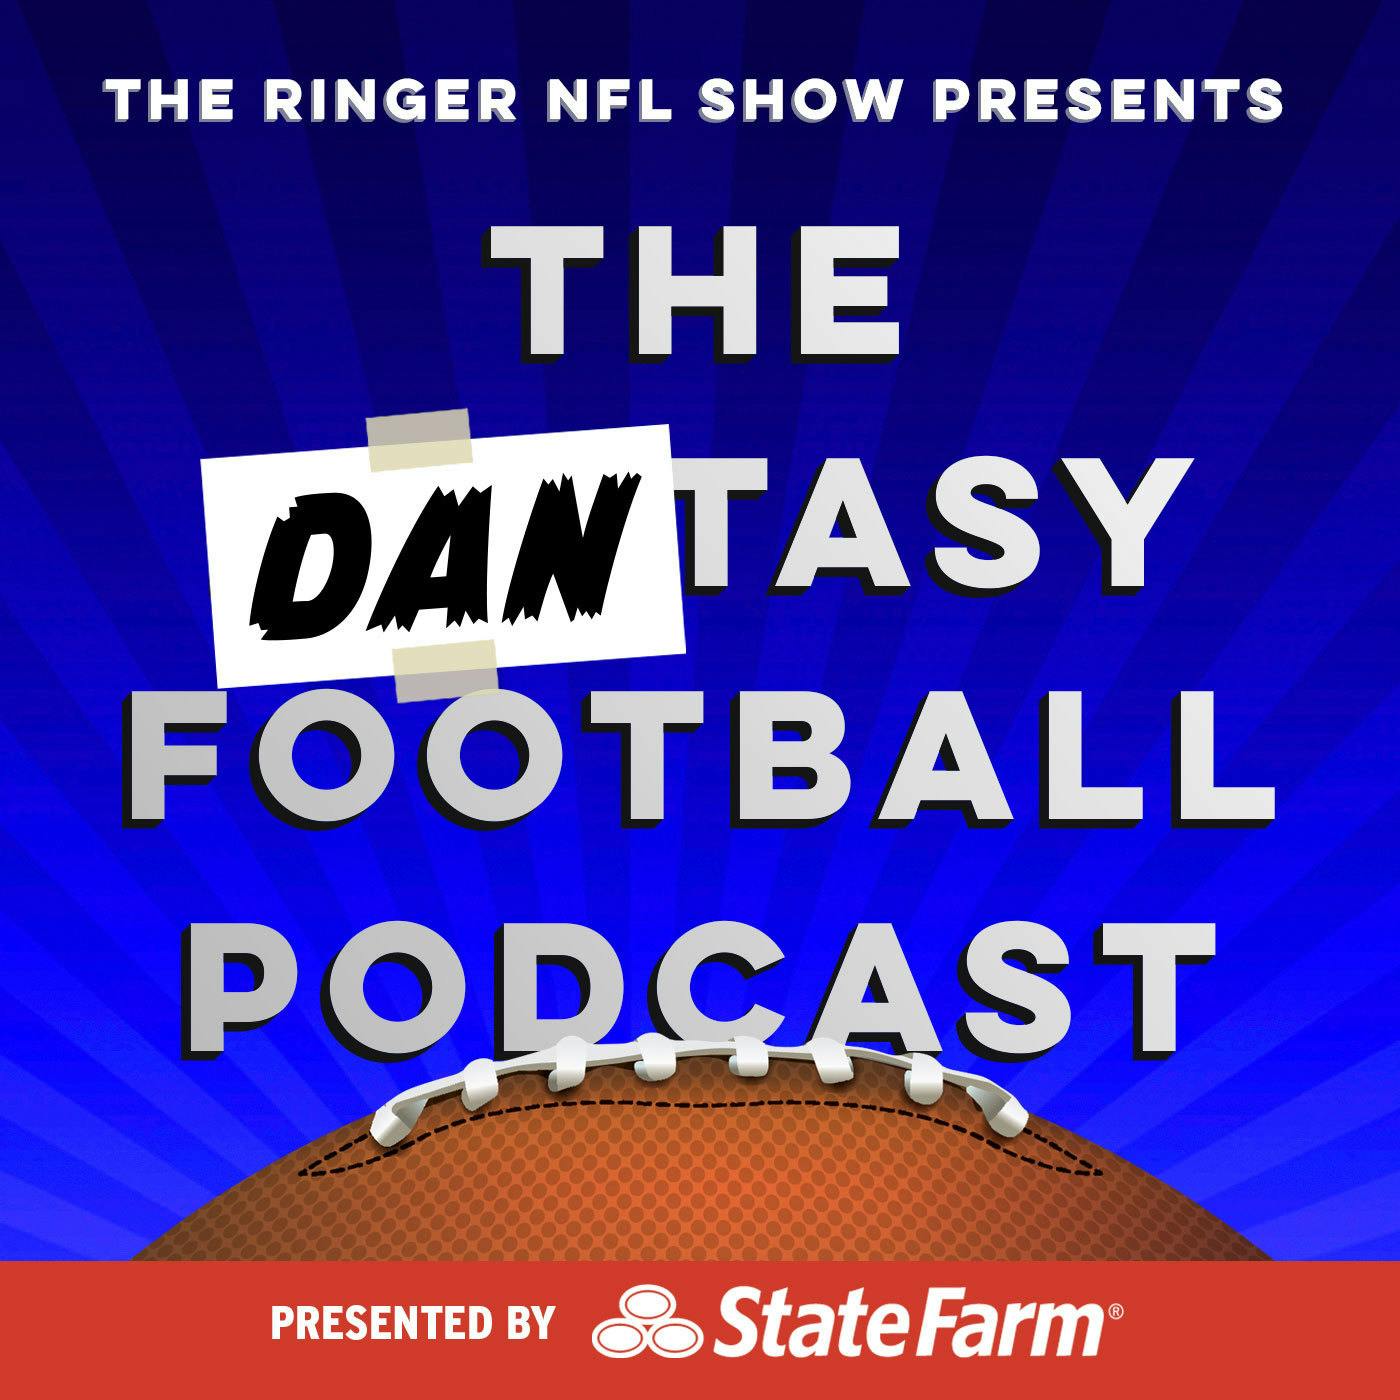 Lamar Jackson Doing Patrick Mahomes Things. Plus: Is There Such a Thing As Too Much Trash Talk? | The Dantasy Football Podcast